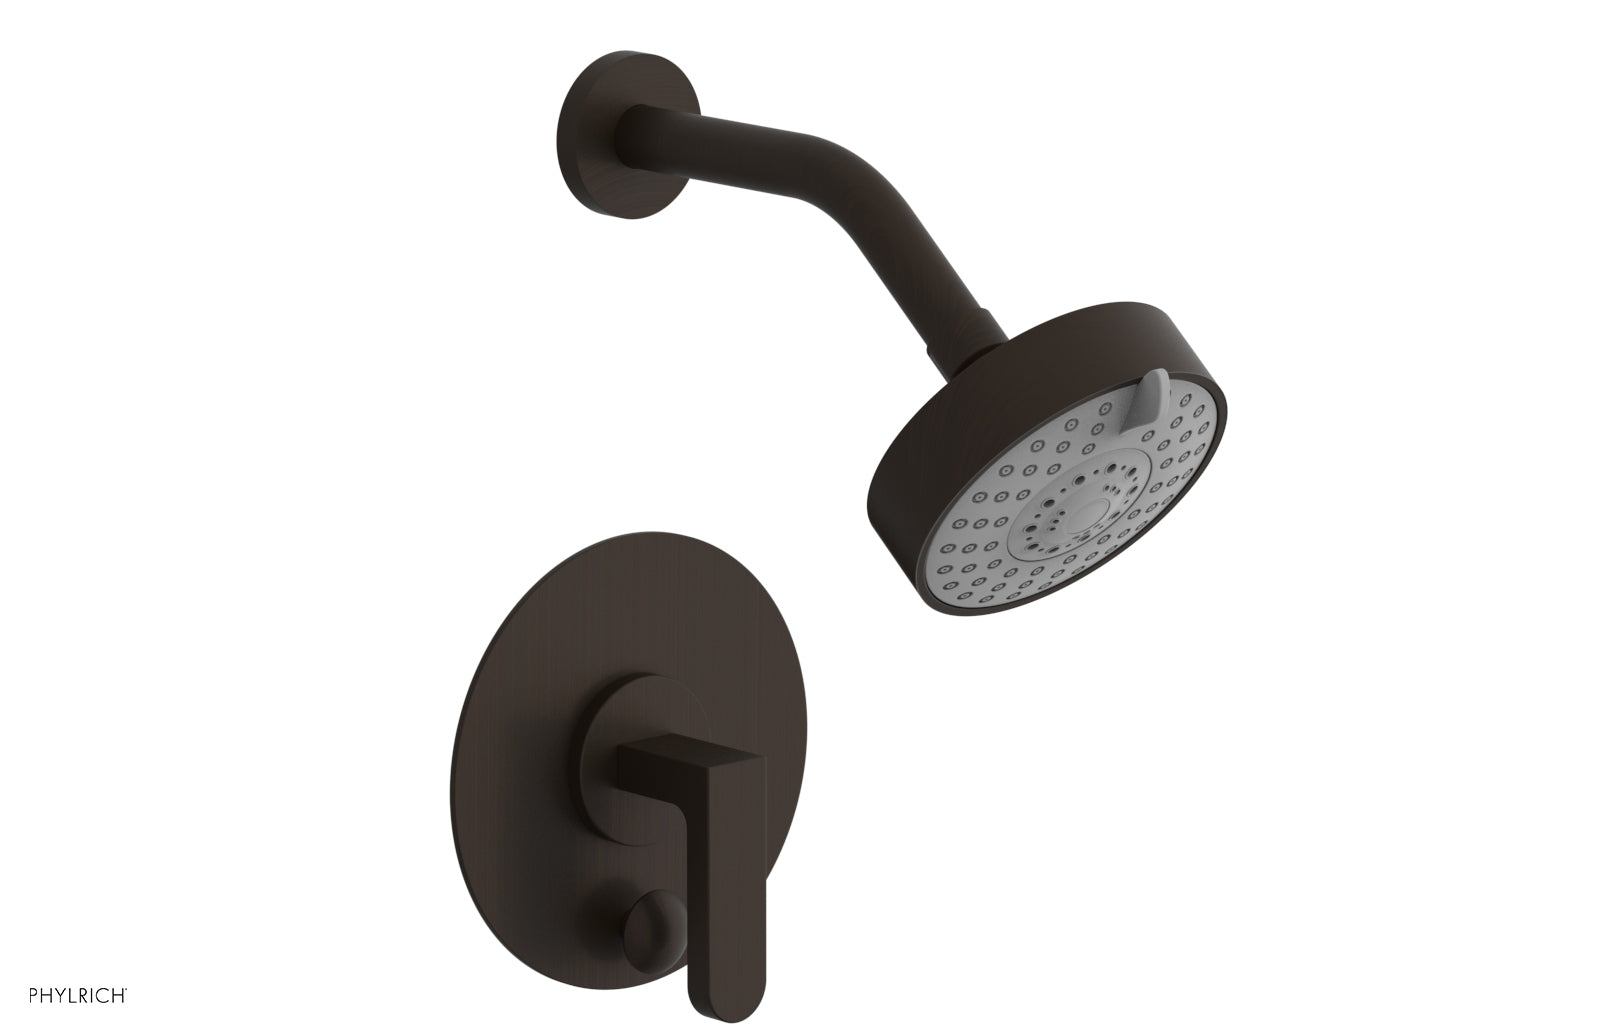 Phylrich ROND Pressure Balance Shower and Diverter Set (Less Spout), Lever Handle